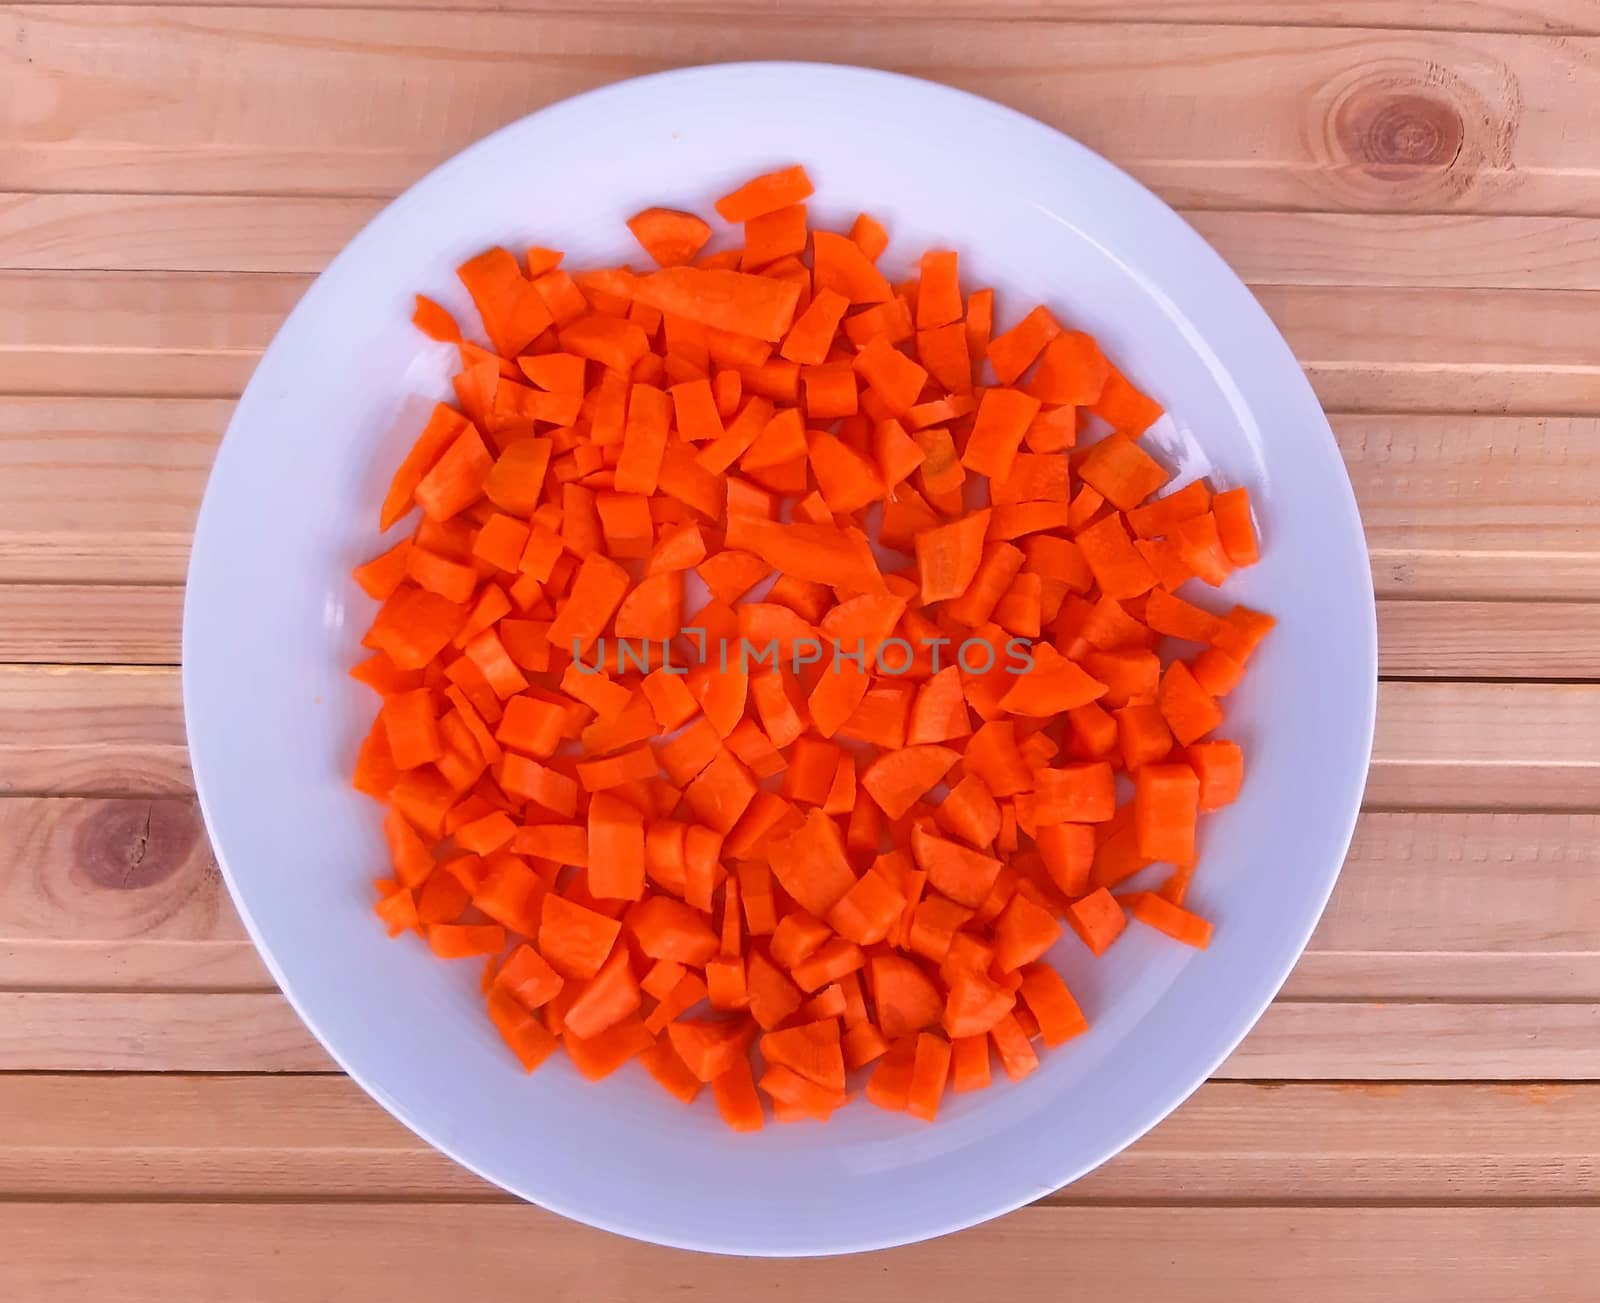 Carrot cut off into a plate on wooden background.